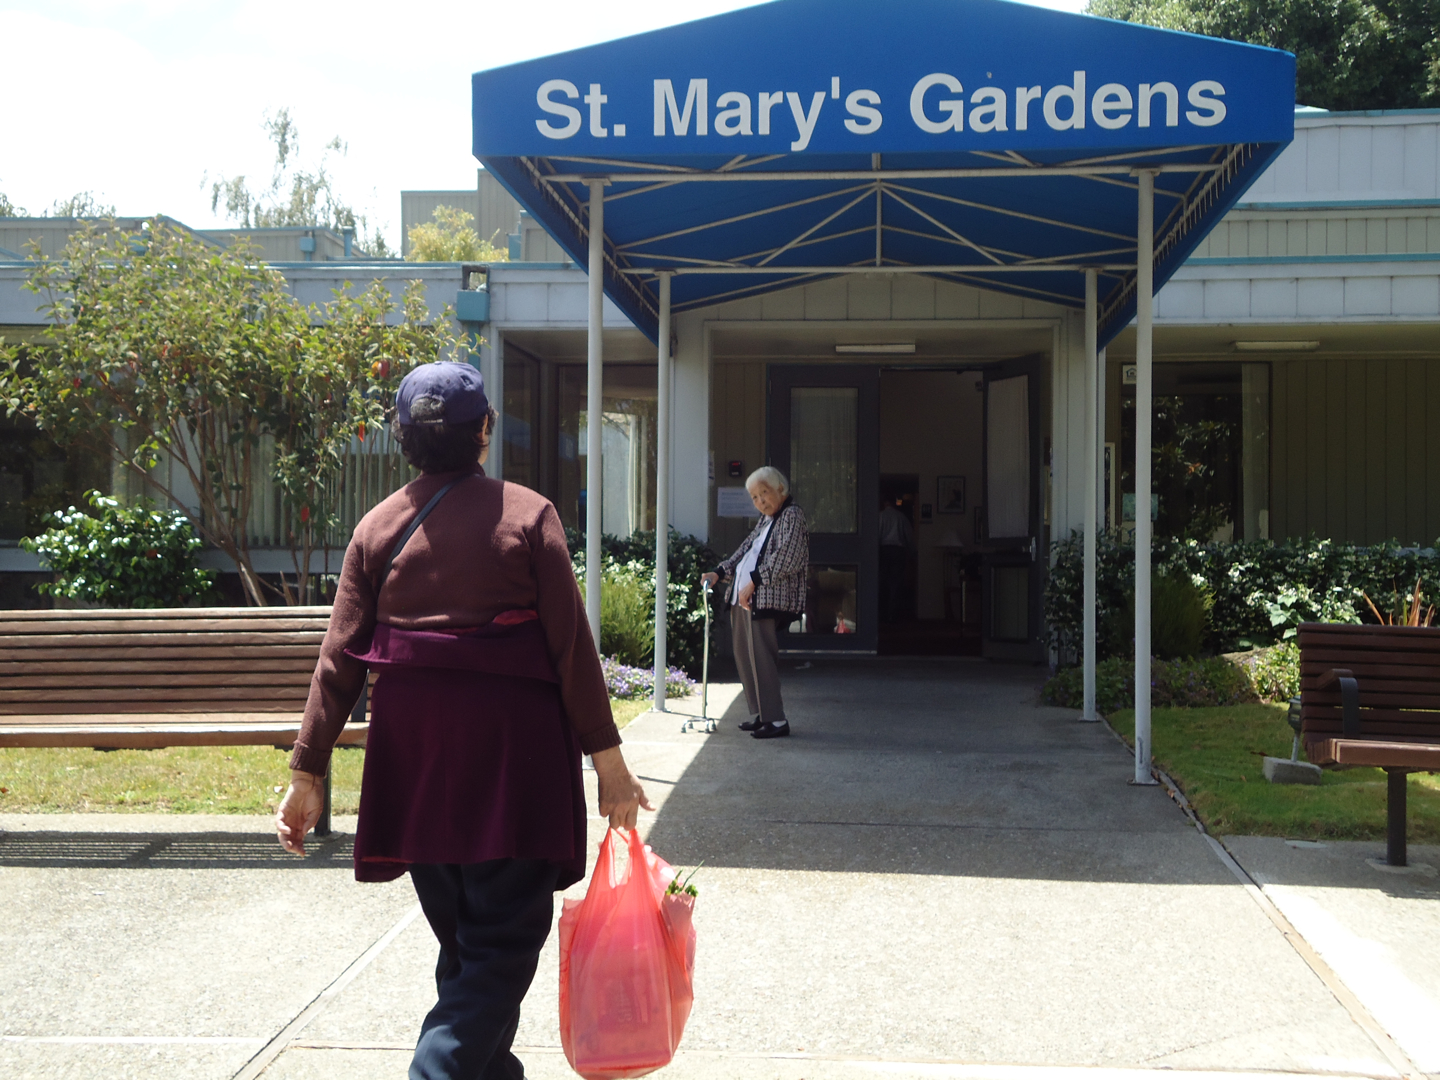 Residents at St. Mary’s Gardens make frequent walking trips back and forth to the Chinatown markets nearby. Parties, dances, and exercise classes also keep seniors active at the community near Oakland’s Old City. By Diana Alonzo.